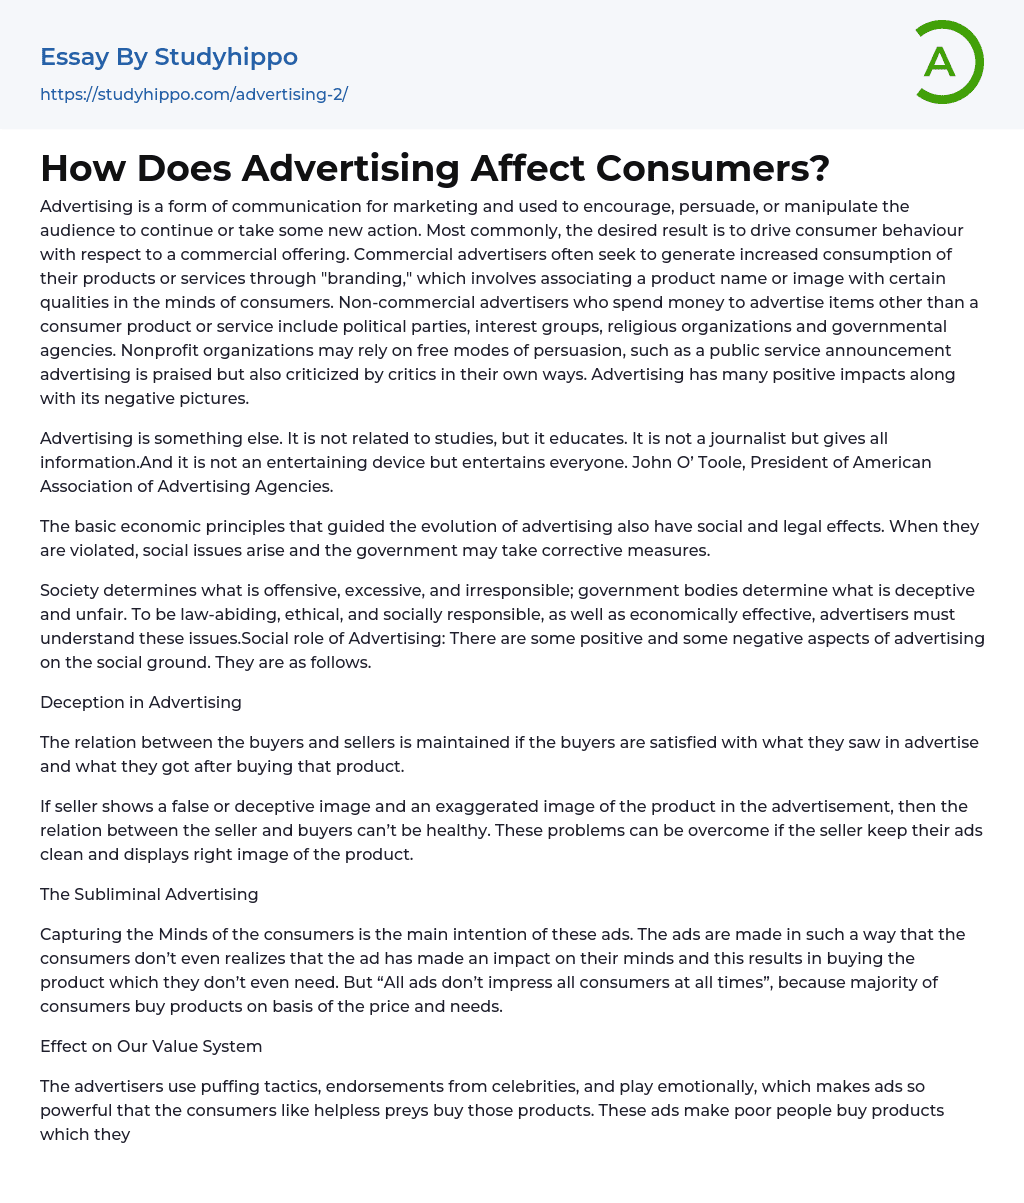 How Does Advertising Affect Consumers? Essay Example